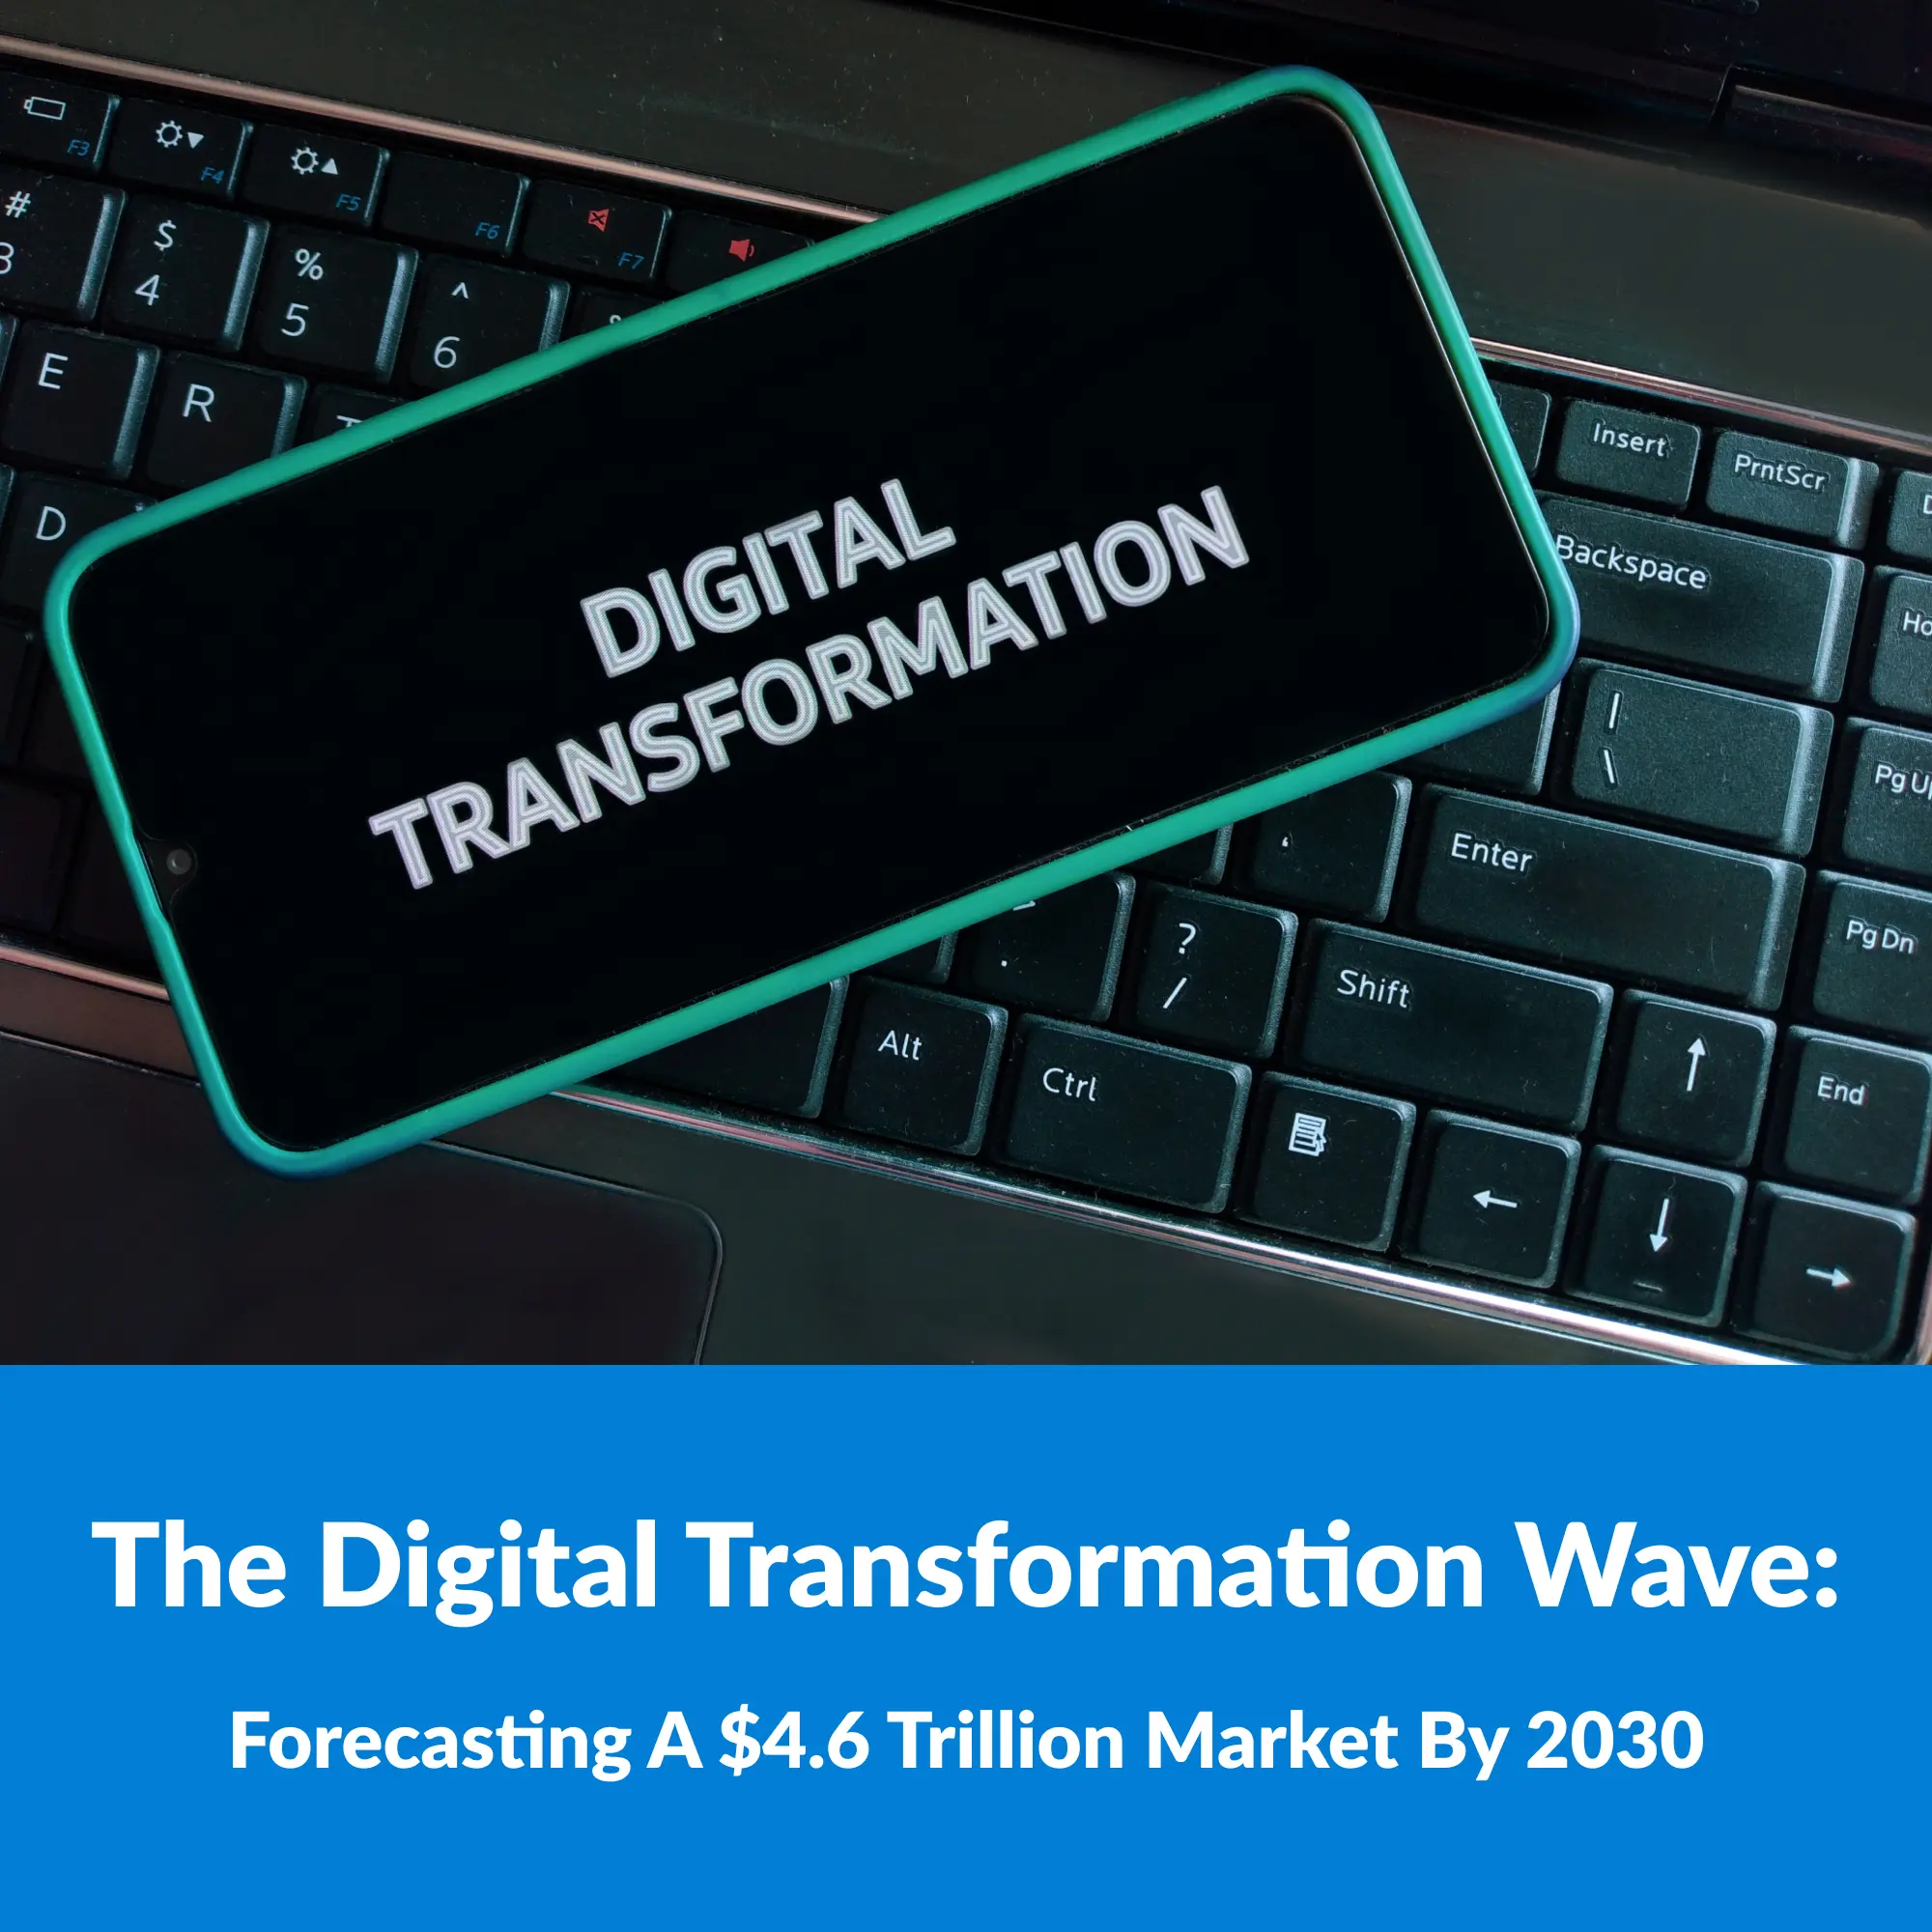 The Digital Transformation Wave: Forecasting a $4.6 Trillion Market by 2030